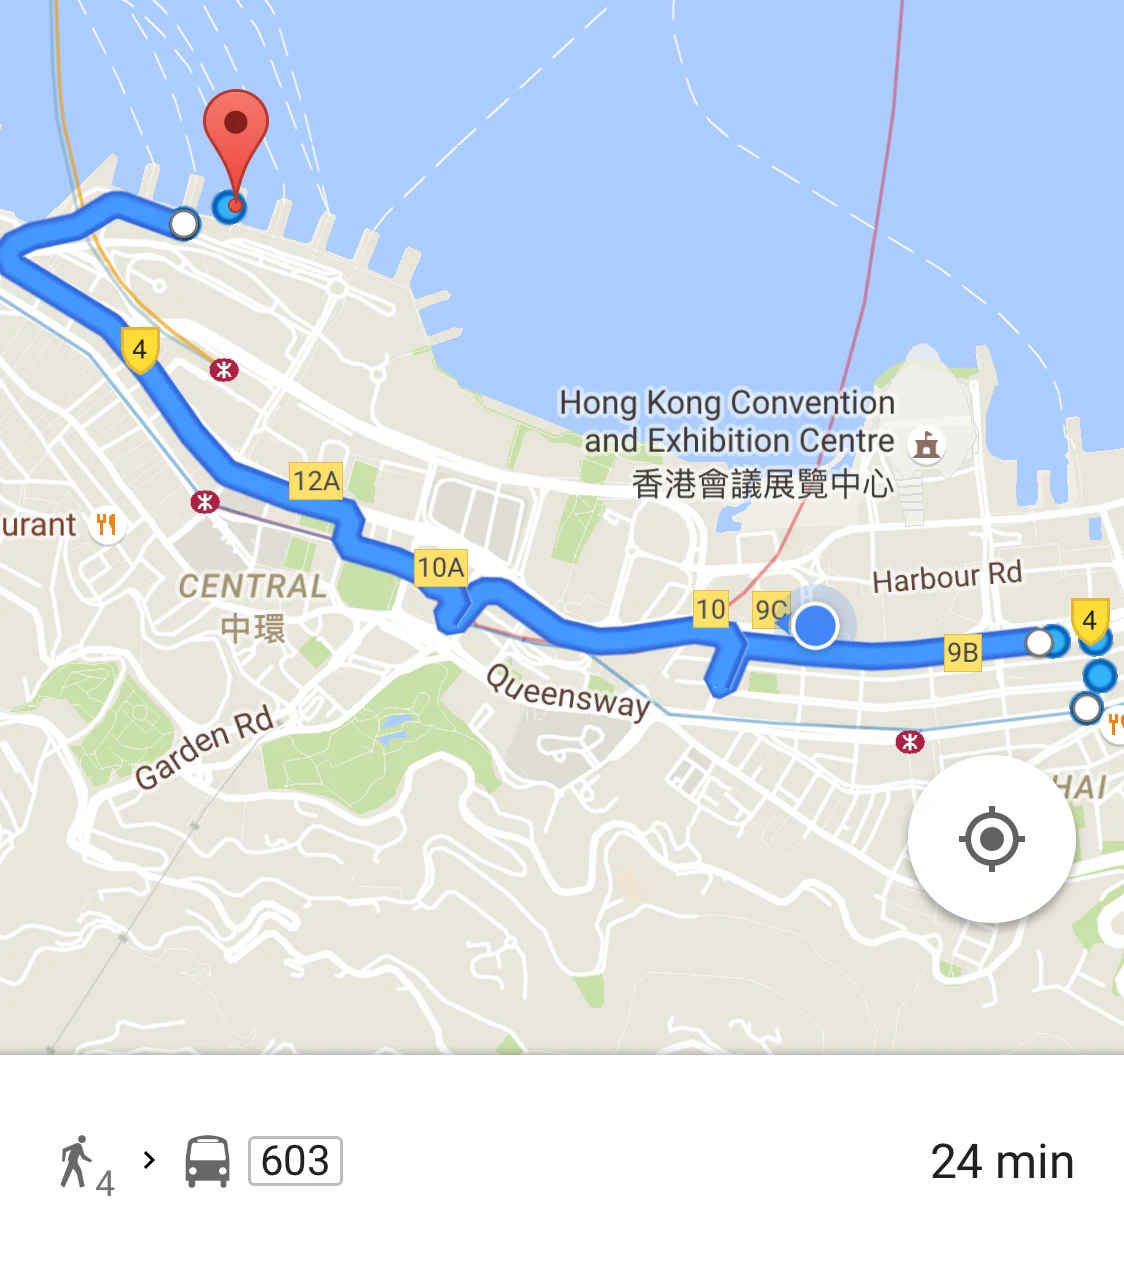 Google Maps suggestion on how to go from Wan Chai to Central Ferry Pier